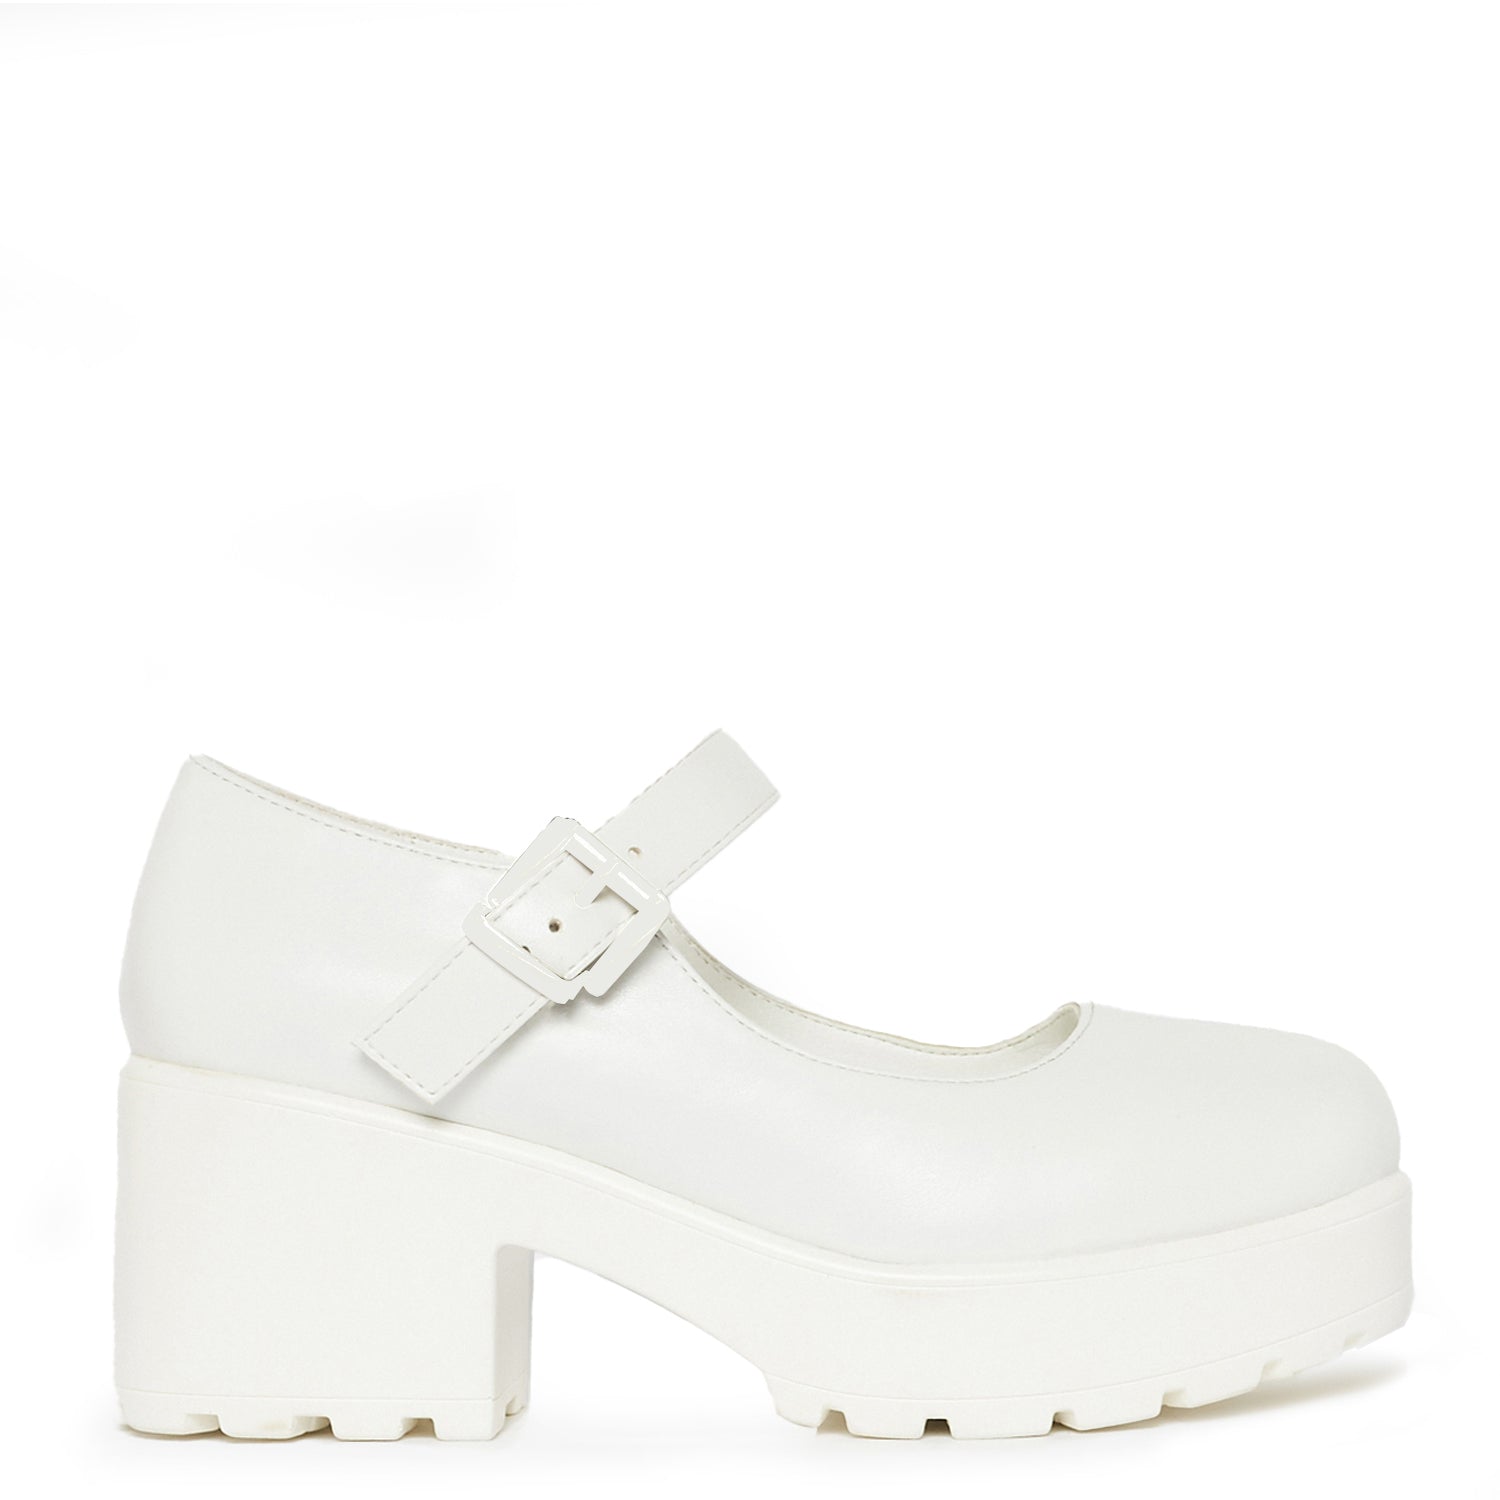 Tira_Mary_Janes_White_Washout_Edition_Chunky_Sole_Platform_Adjustable_Buckle_Shoes_4_-Copy.jpg